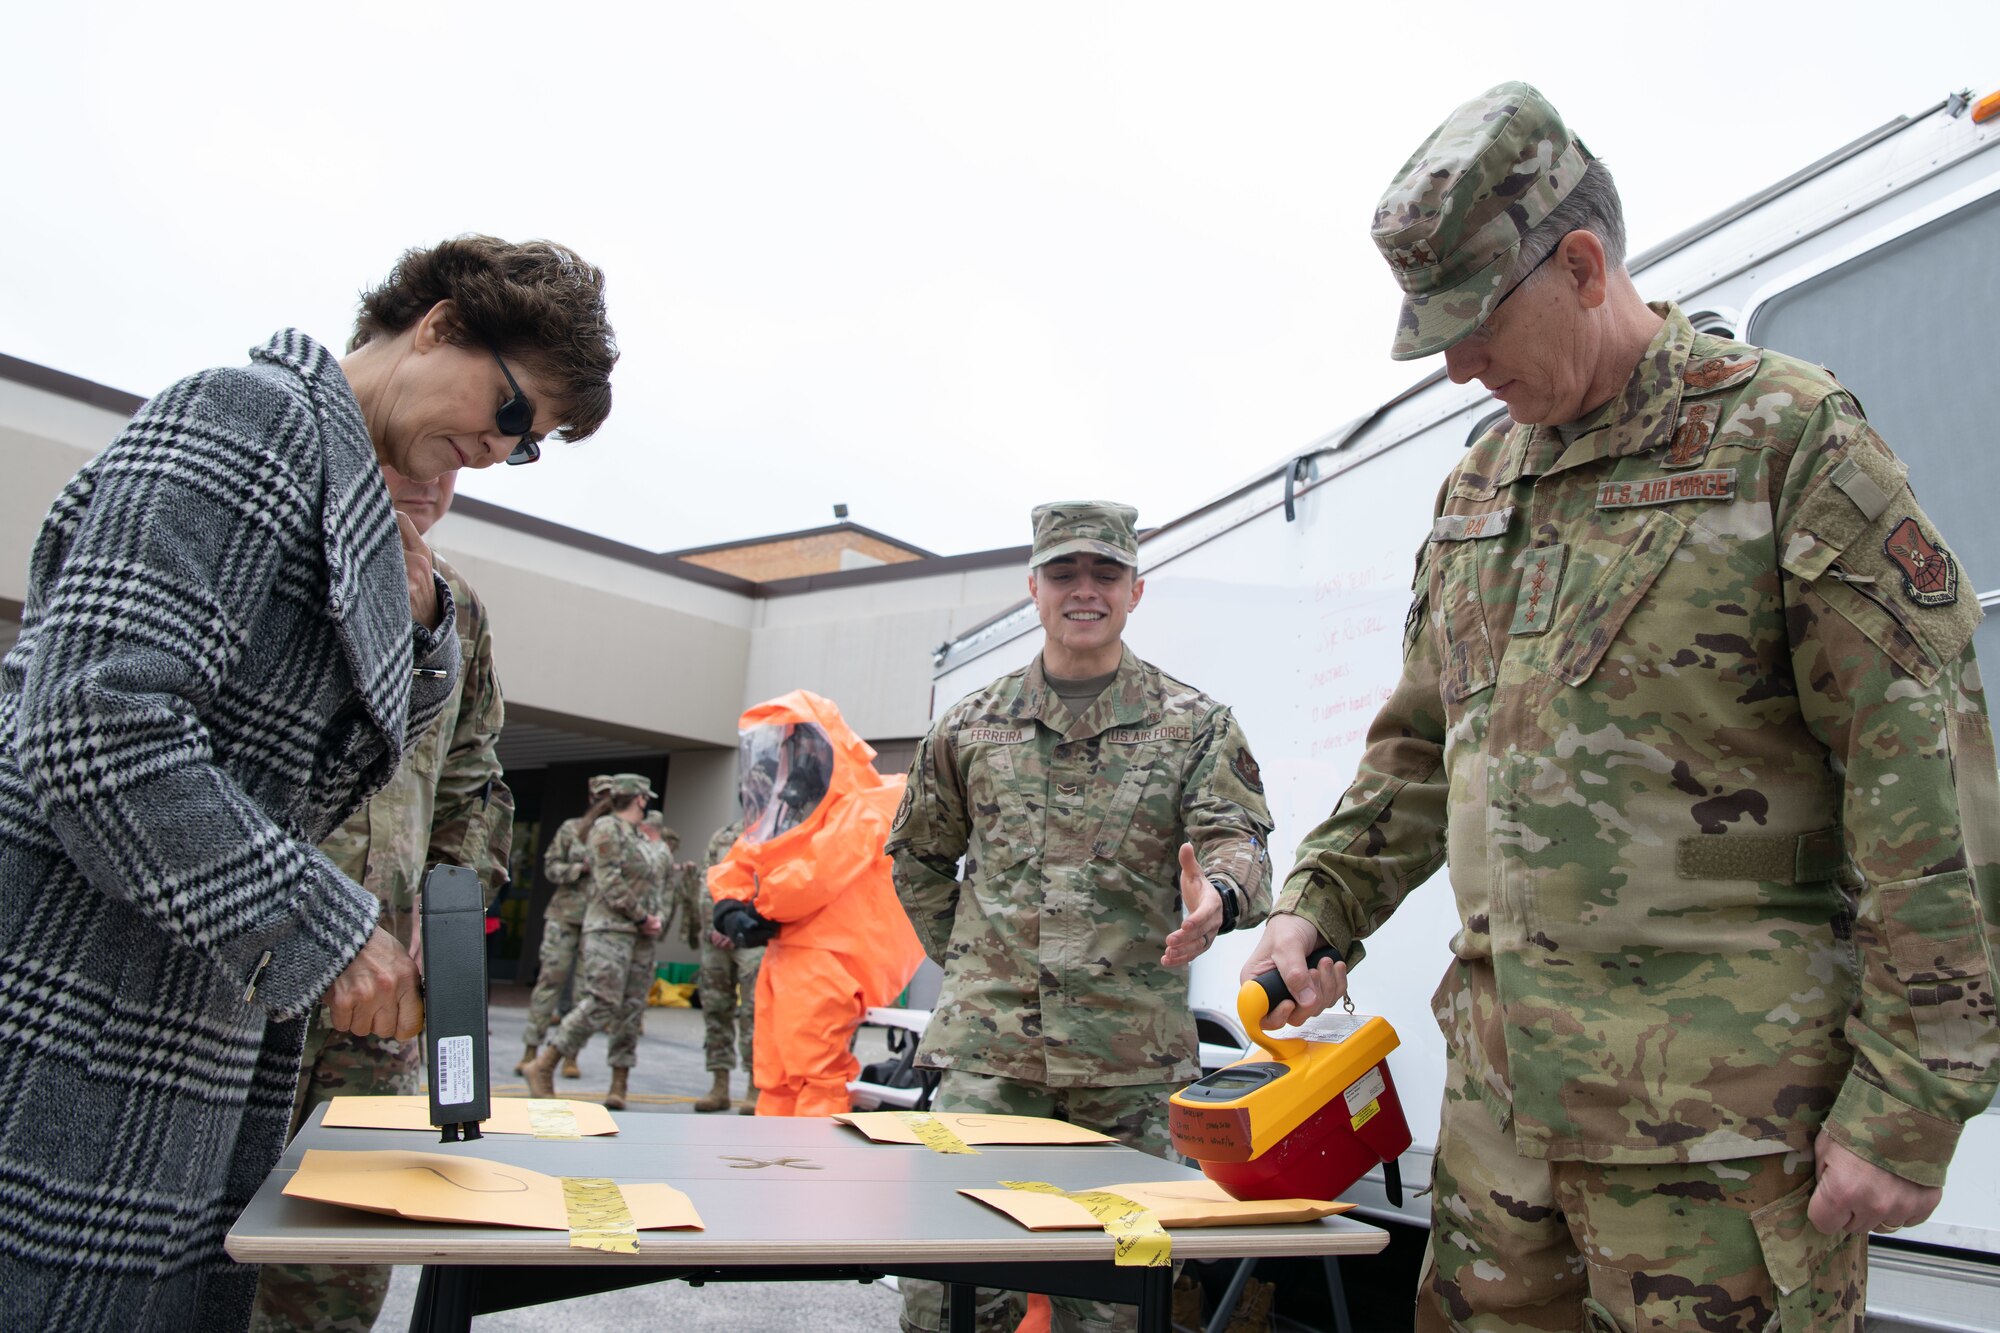 Rhonda Ray and her husband, Gen. Tim Ray, Air Force Global Strike Command commander, use a Geiger counter during a radioactive material identification demonstration at the 28th Medical Group on Ellsworth Air Force Base, S.D., May 26, 2021.